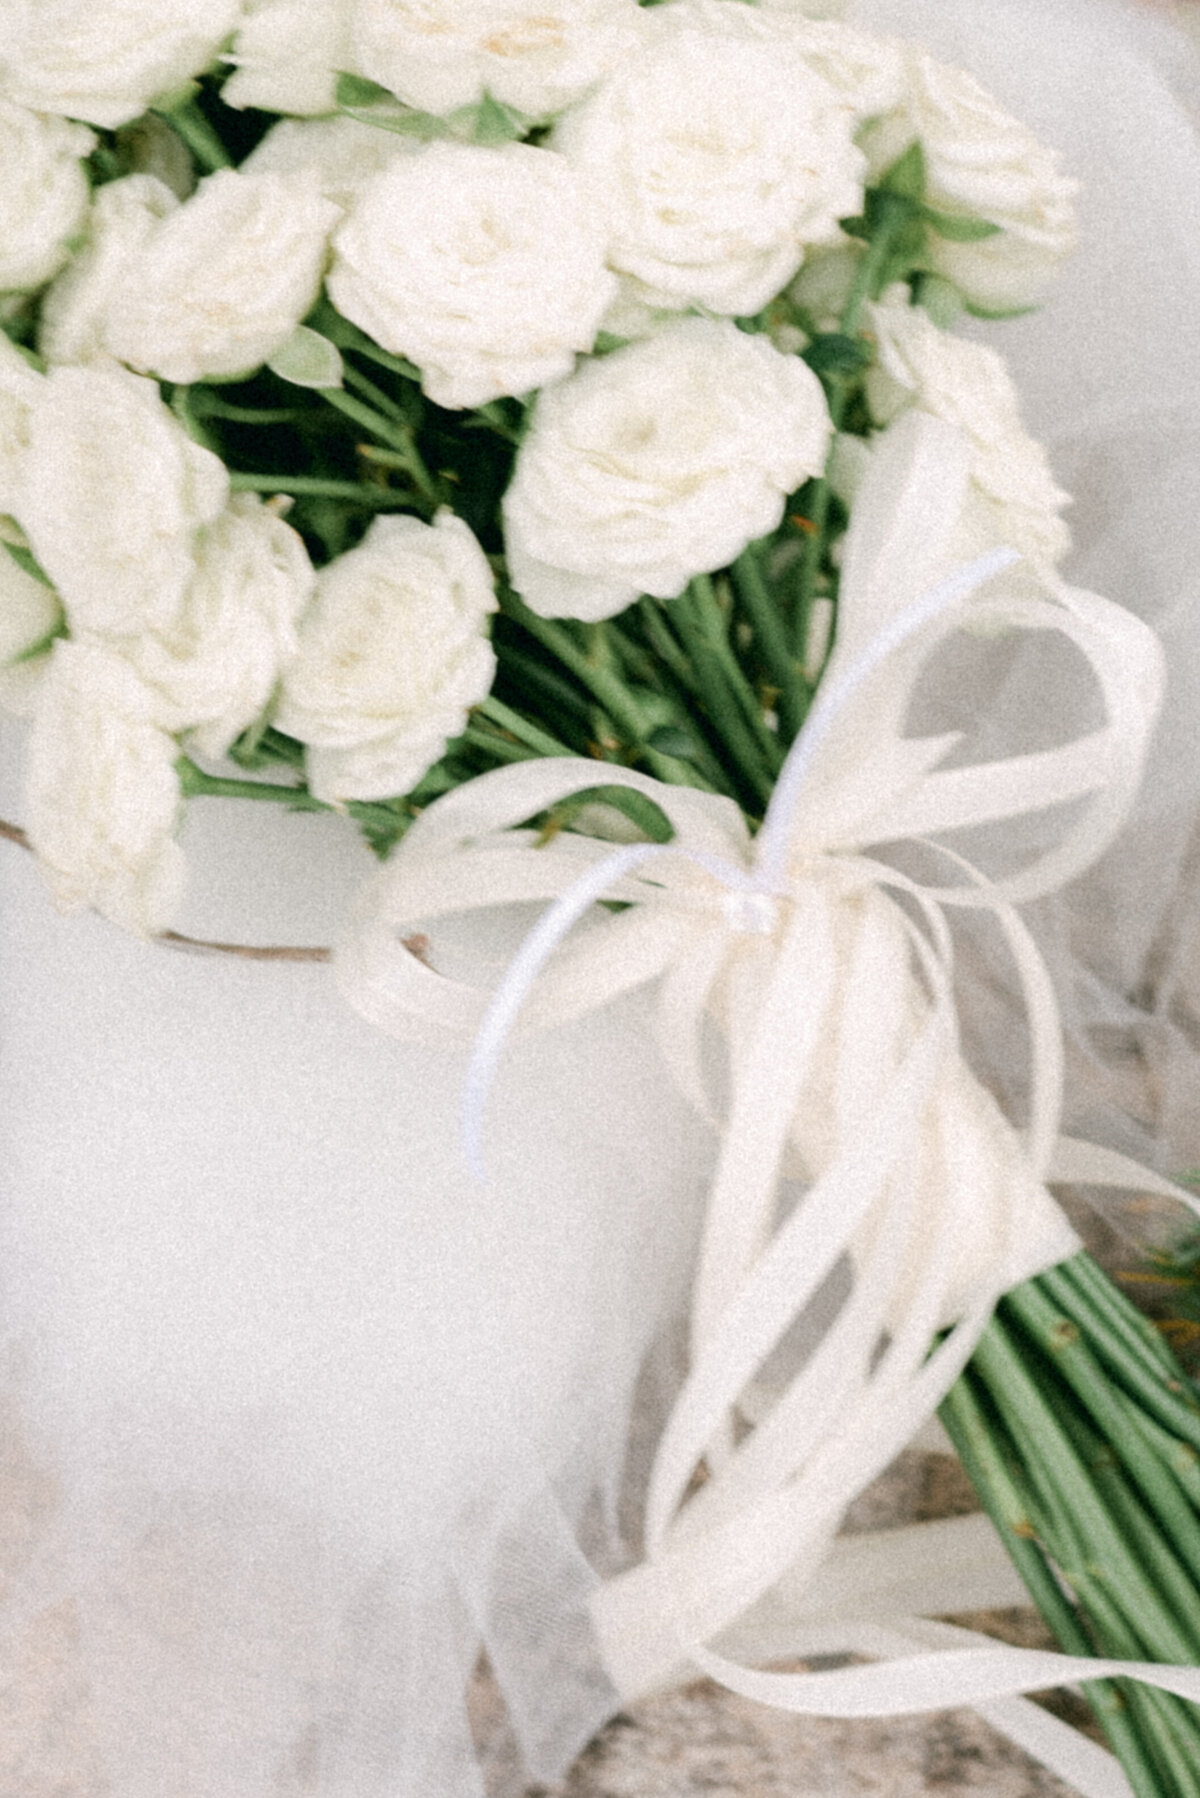 A detail image of a wedding bouquet of white roses and white laces photographed by wedding photographer Hannika Gabrielsson.